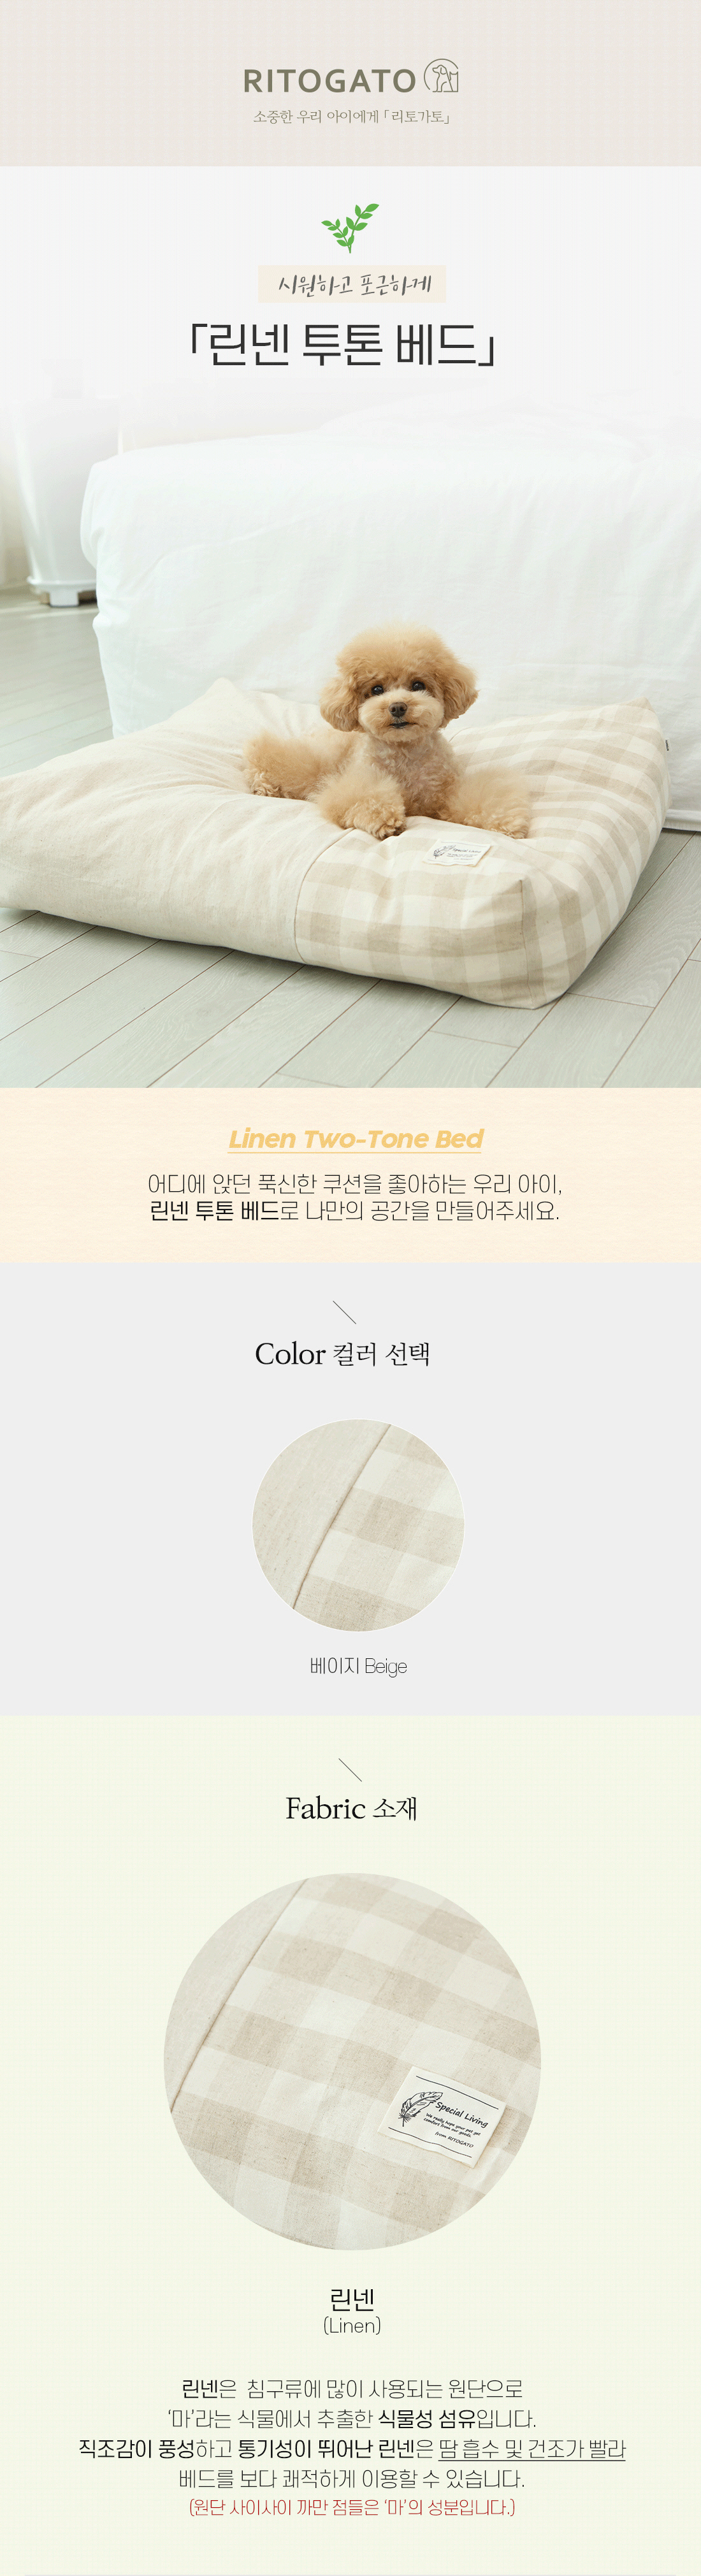 linen-two-tone-bed_01_163945.jpg